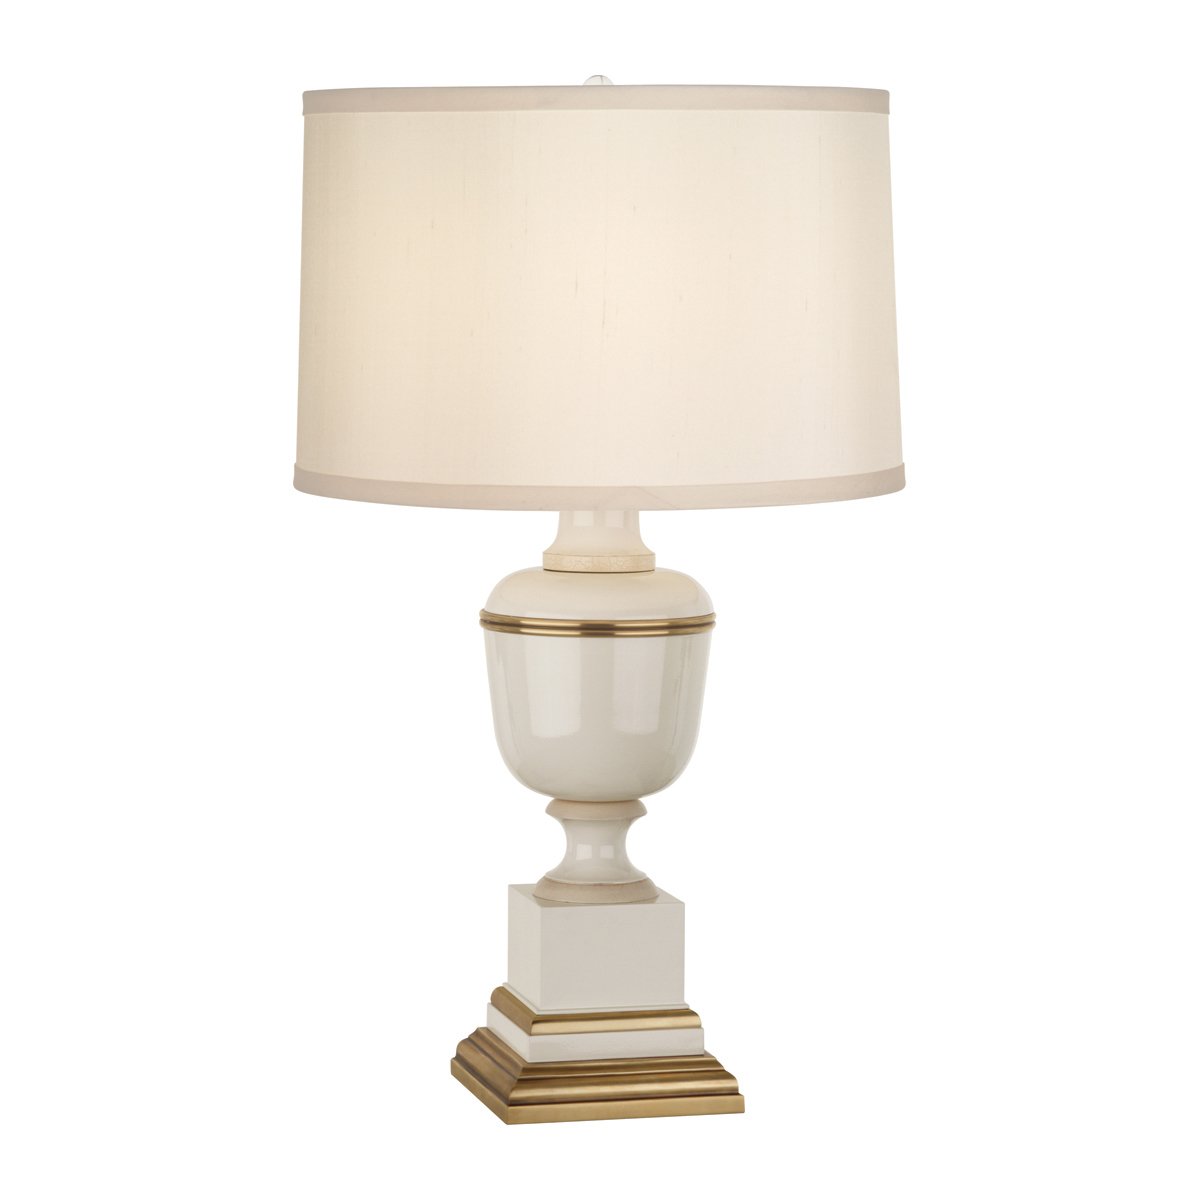 Annika Accent Lamp in Ivory Lacquered Paint w Natural Brass and Fabric Shade design by Robert Abbey